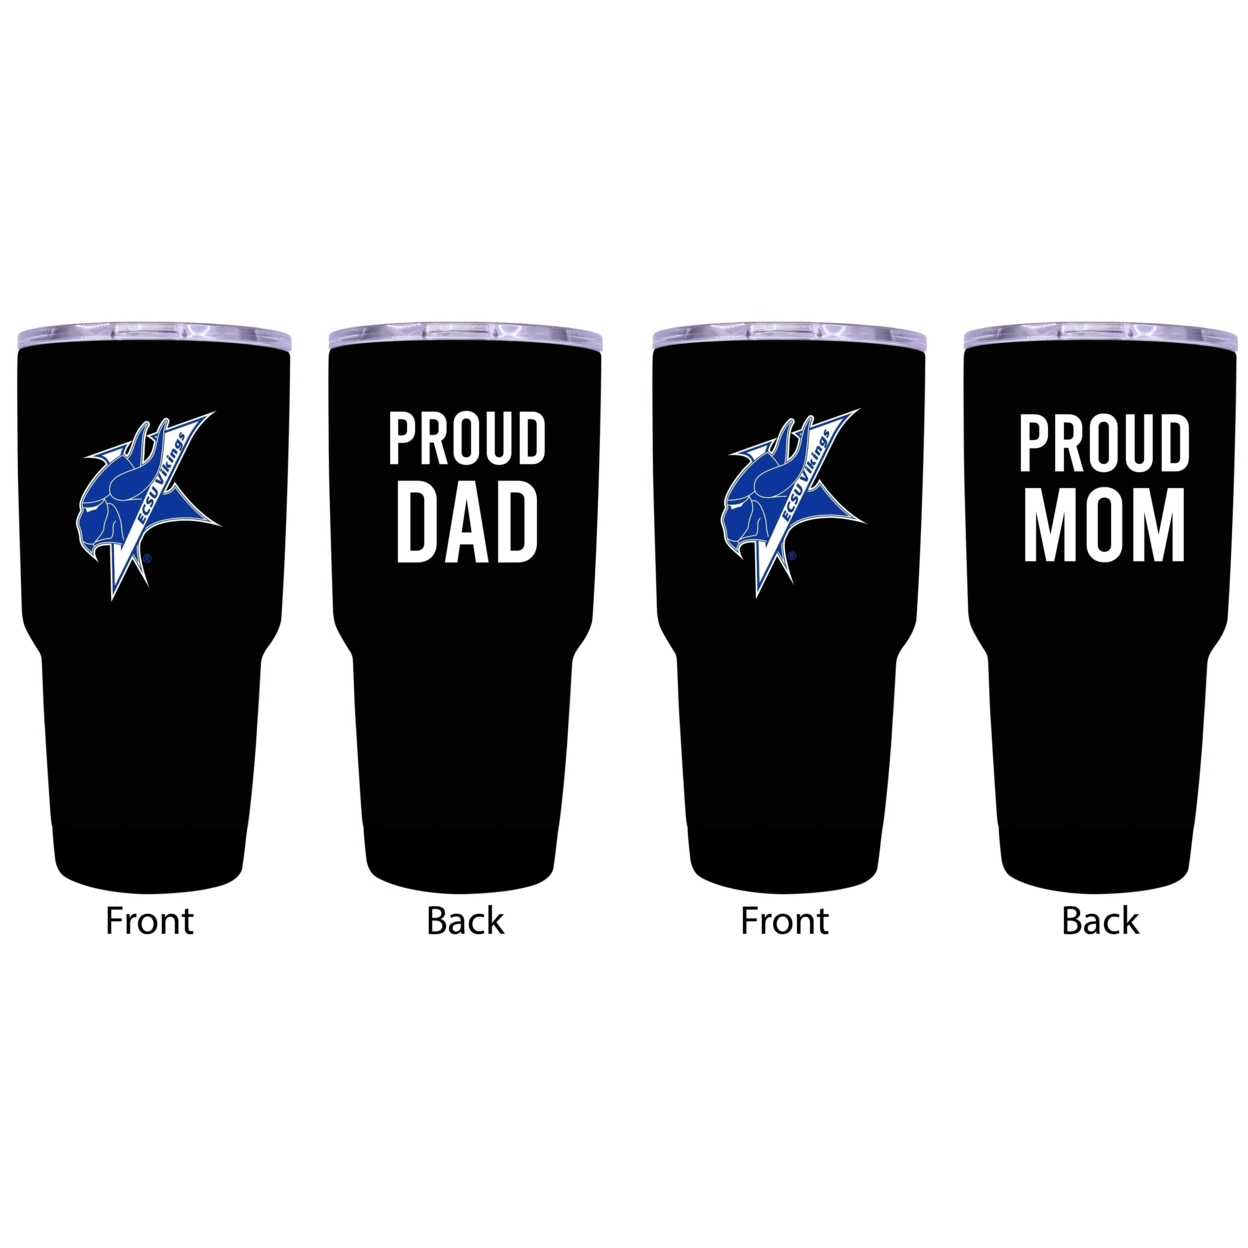 Elizabeth City State University Proud Mom And Dad 24 Oz Insulated Stainless Steel Tumblers 2 Pack Black.